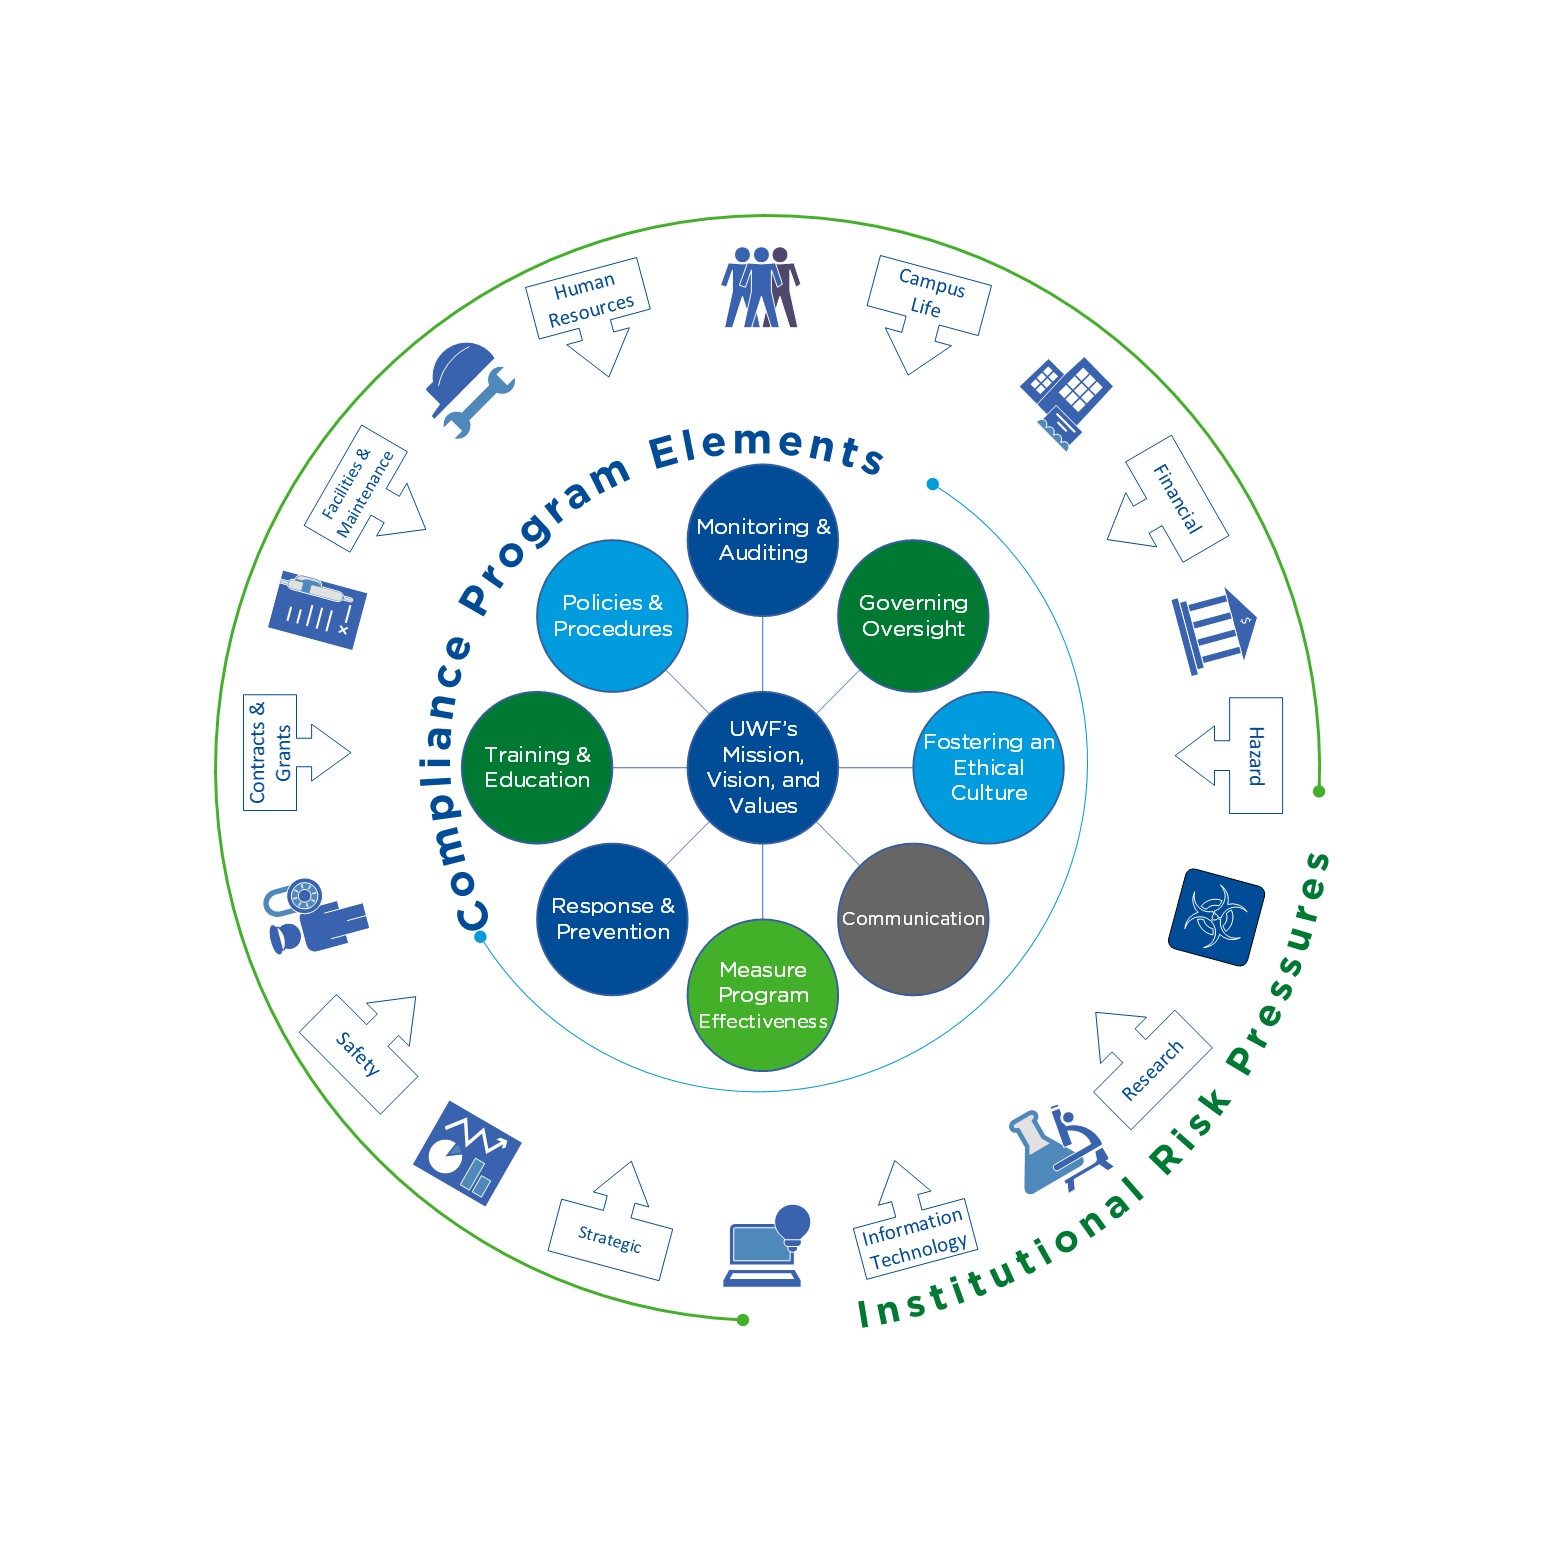 Infographic displaying the fundamental elements of the UWF Compliance Program and its risk factors